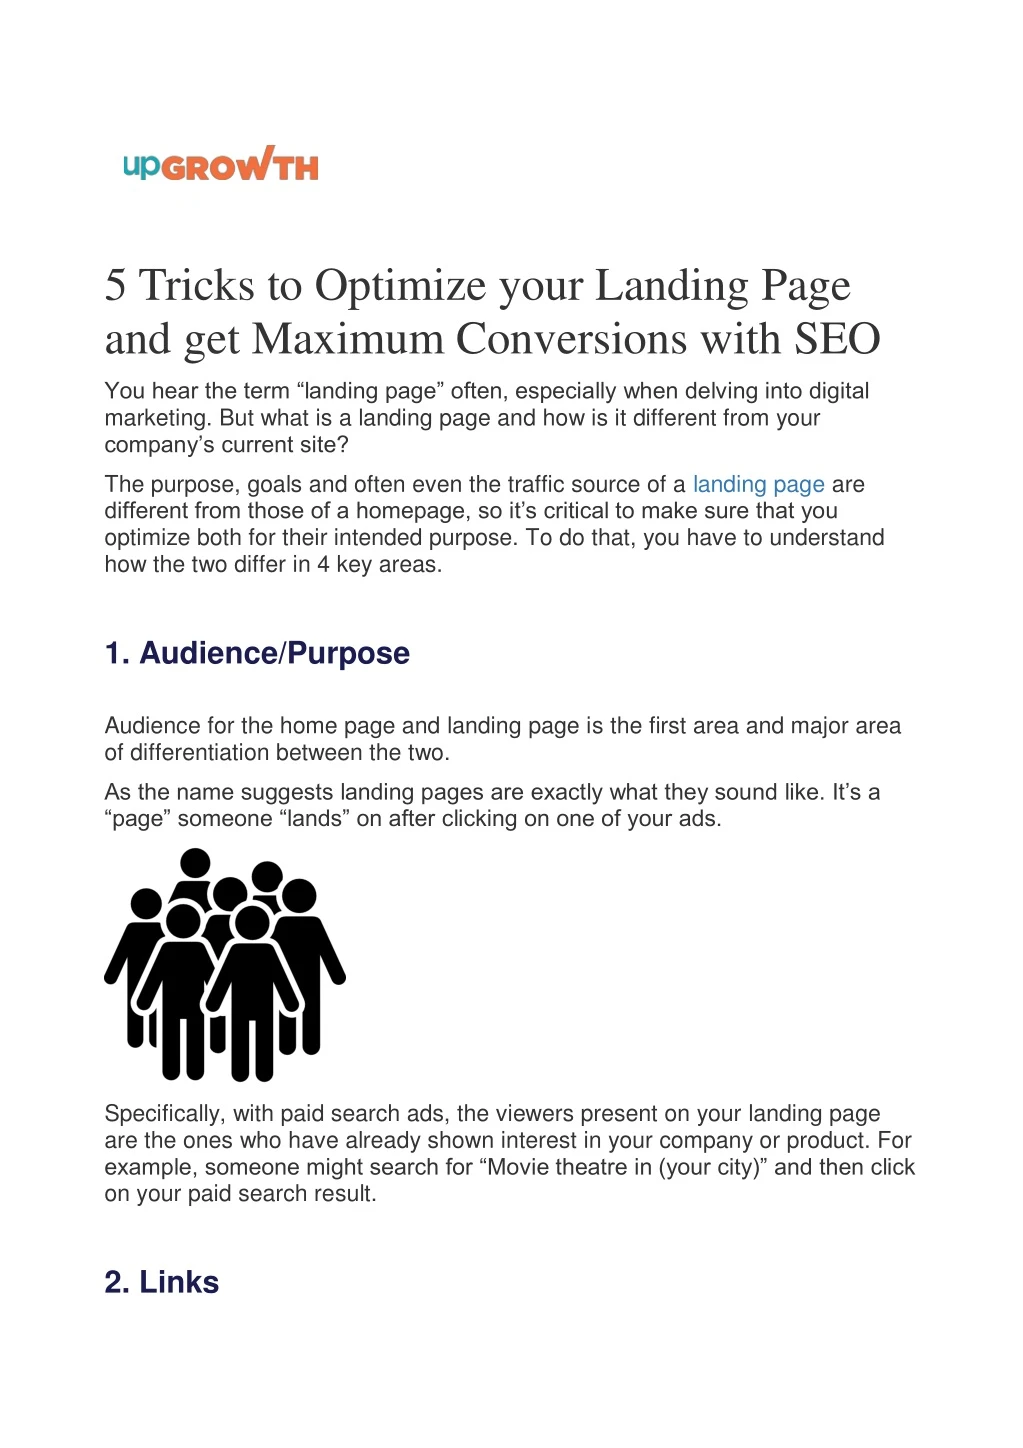 5 tricks to optimize your landing page